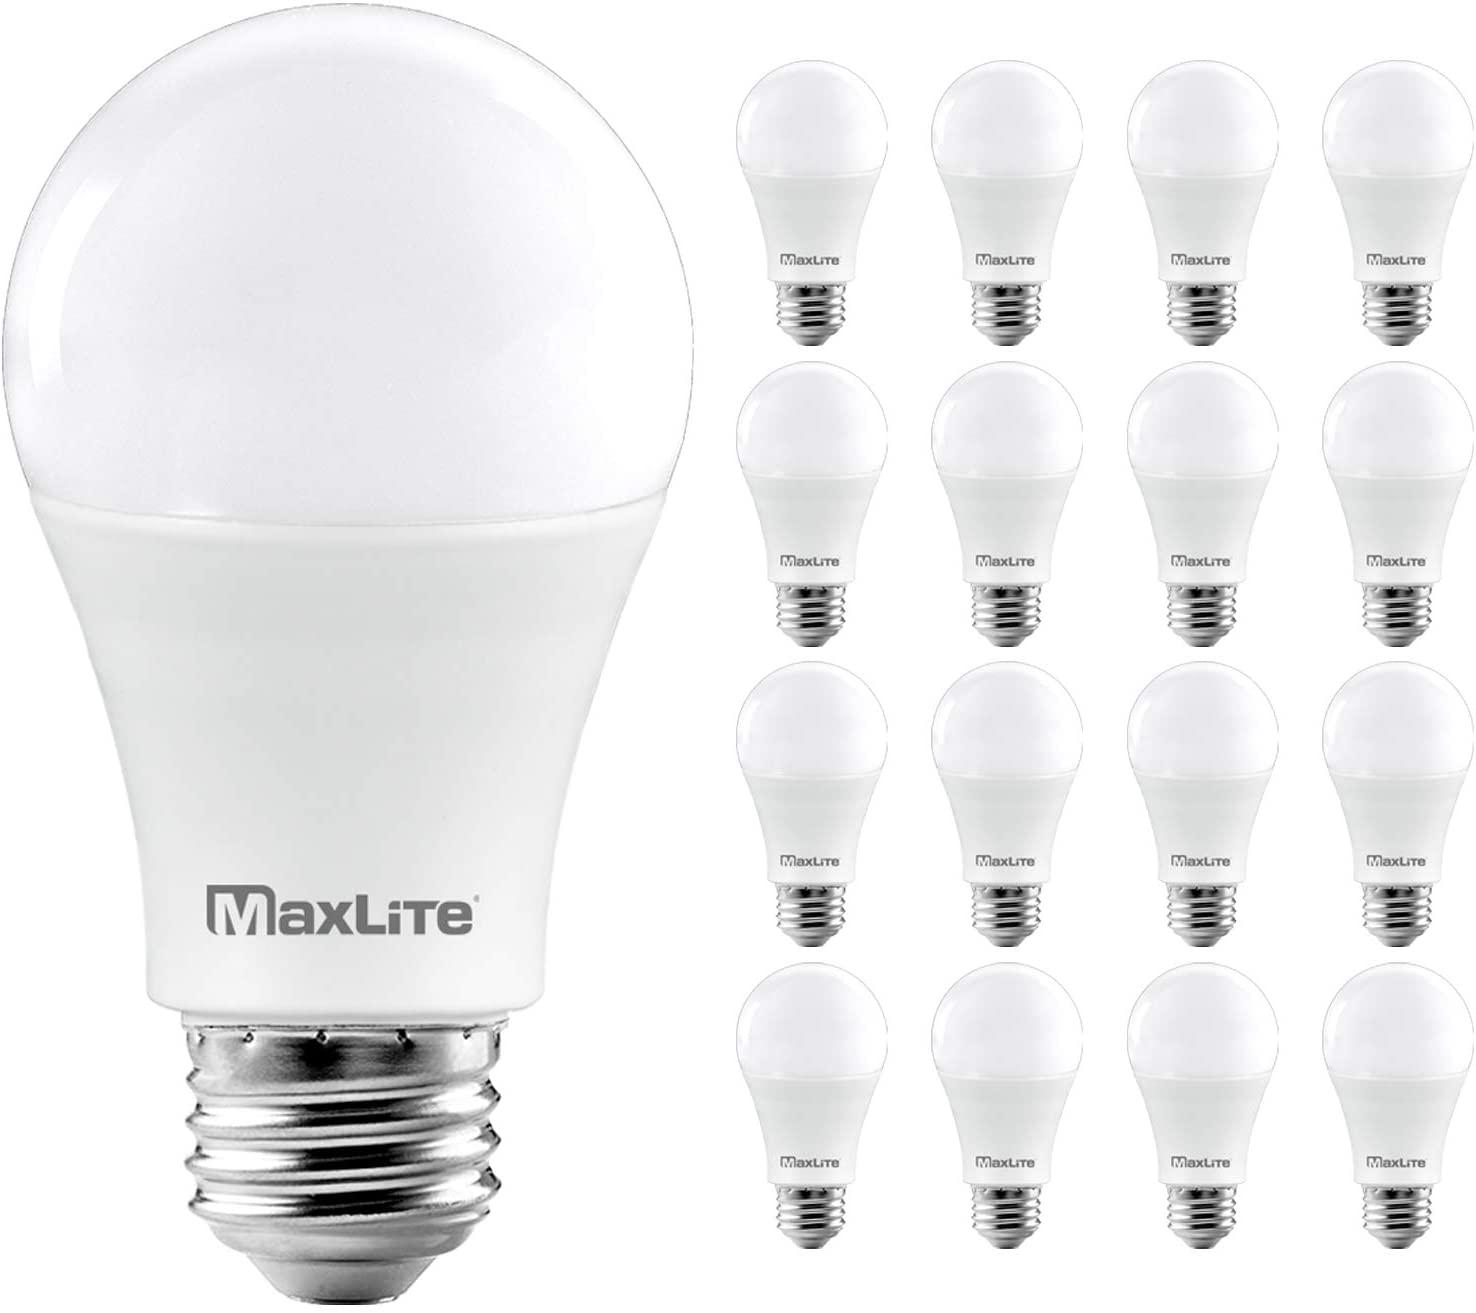 16 MaxLite A19 100W Equivalent Dimmable LED Bulbs for $24.93 Shipped